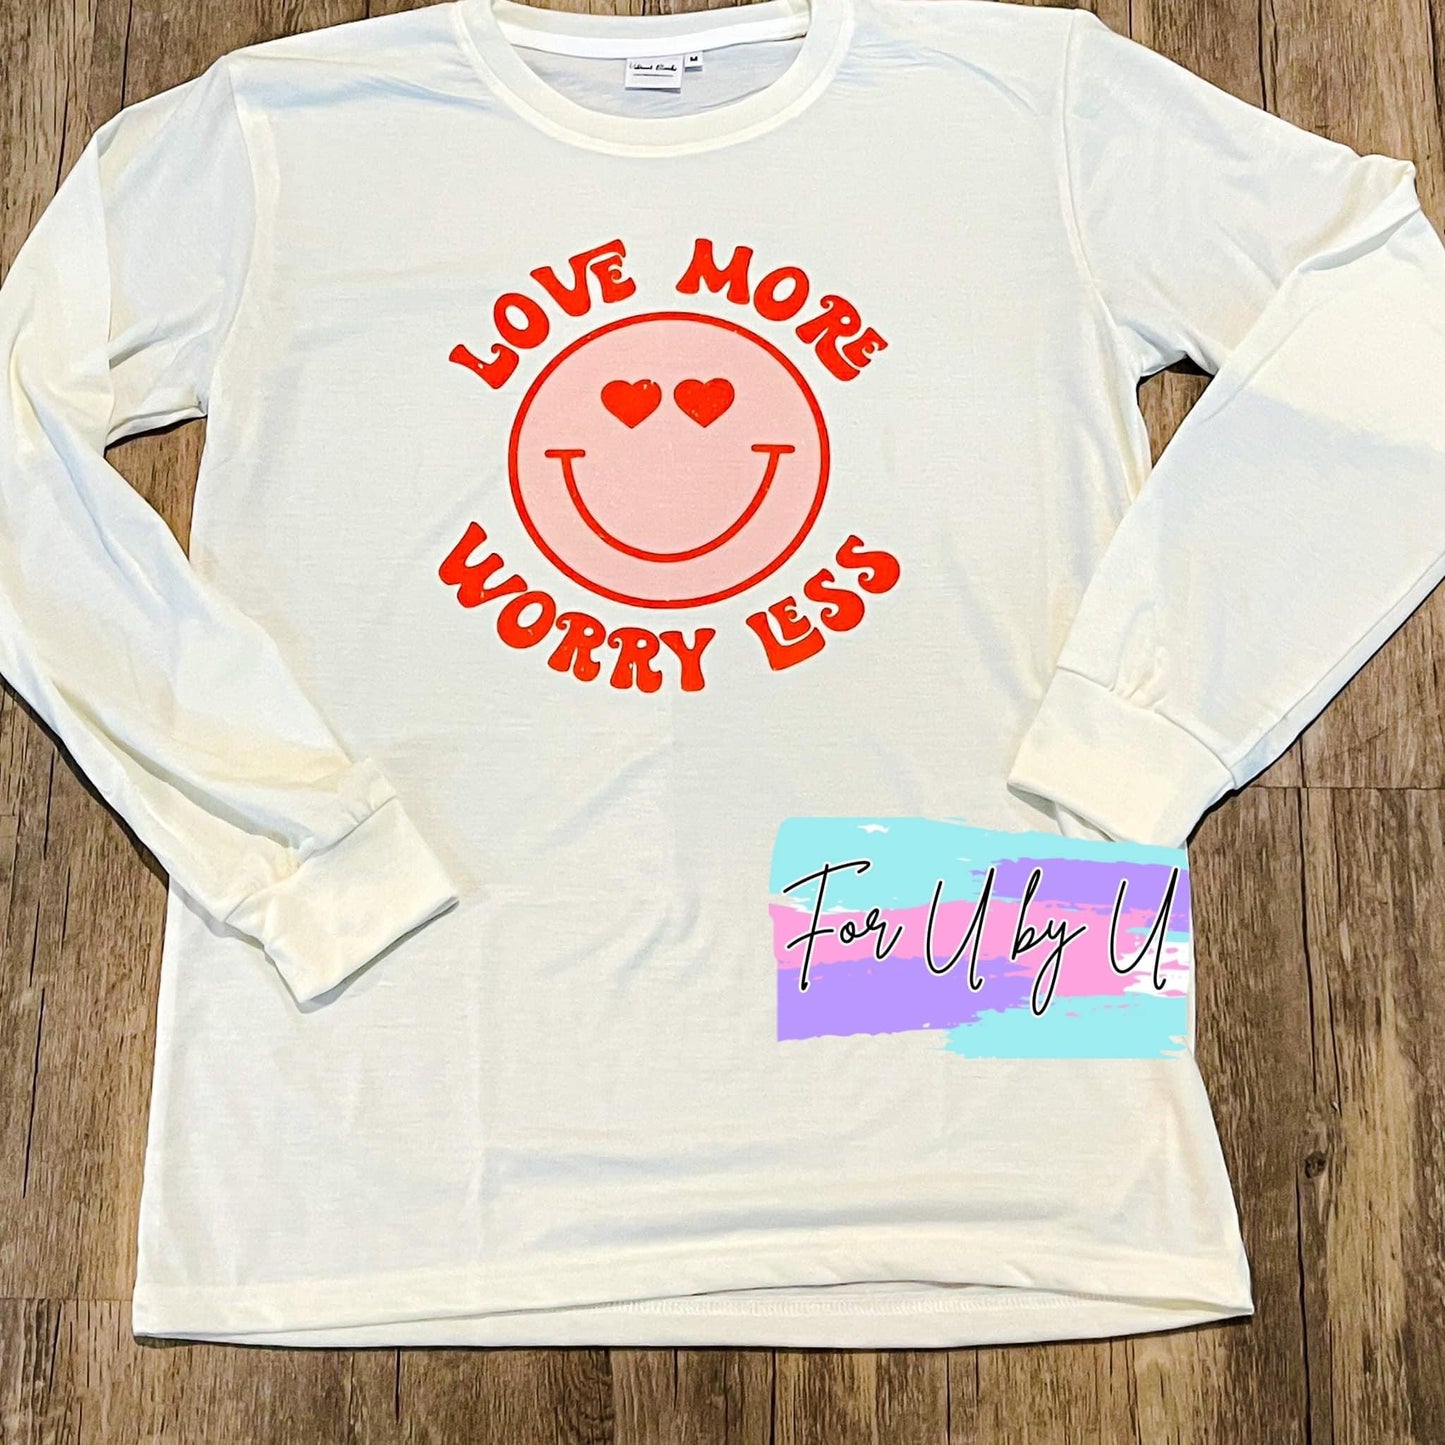 Love More Worry Less Shirt